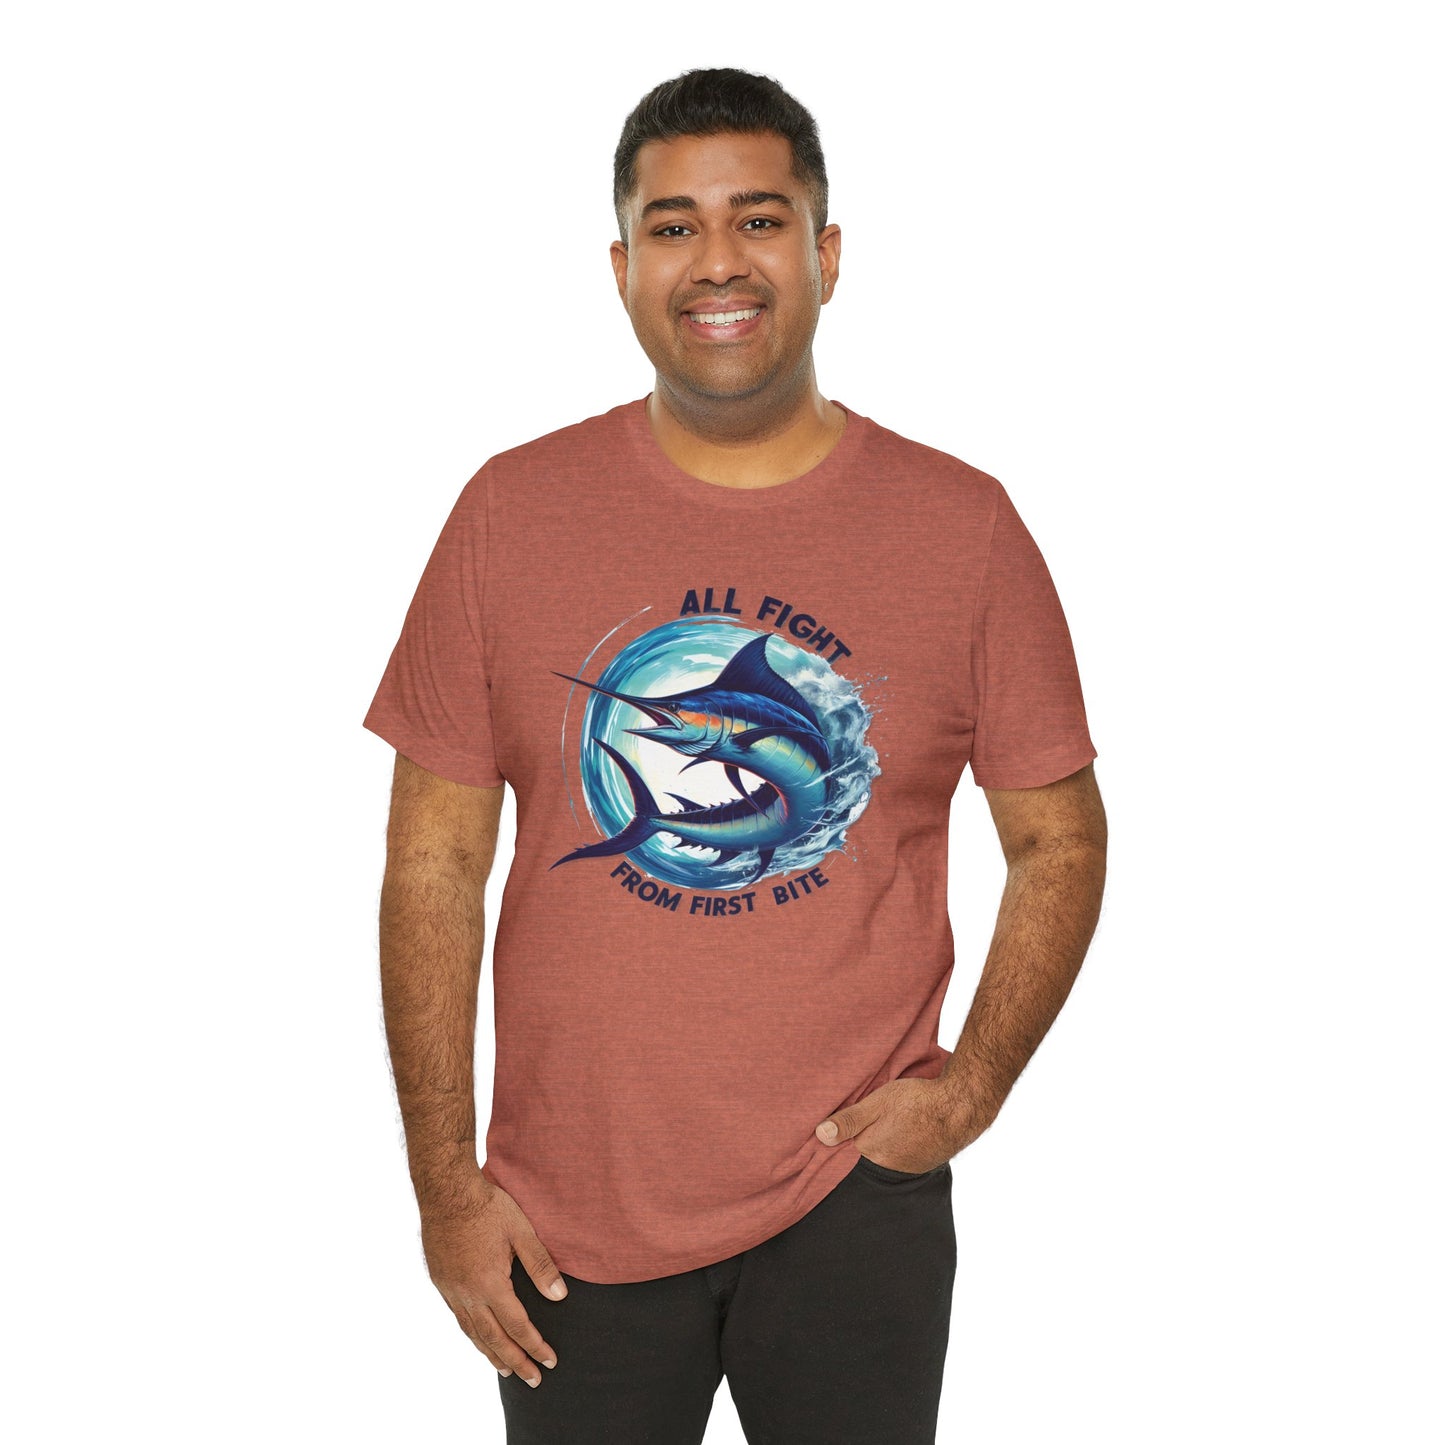 Marlin All Fight from First Bite - T-Shirt